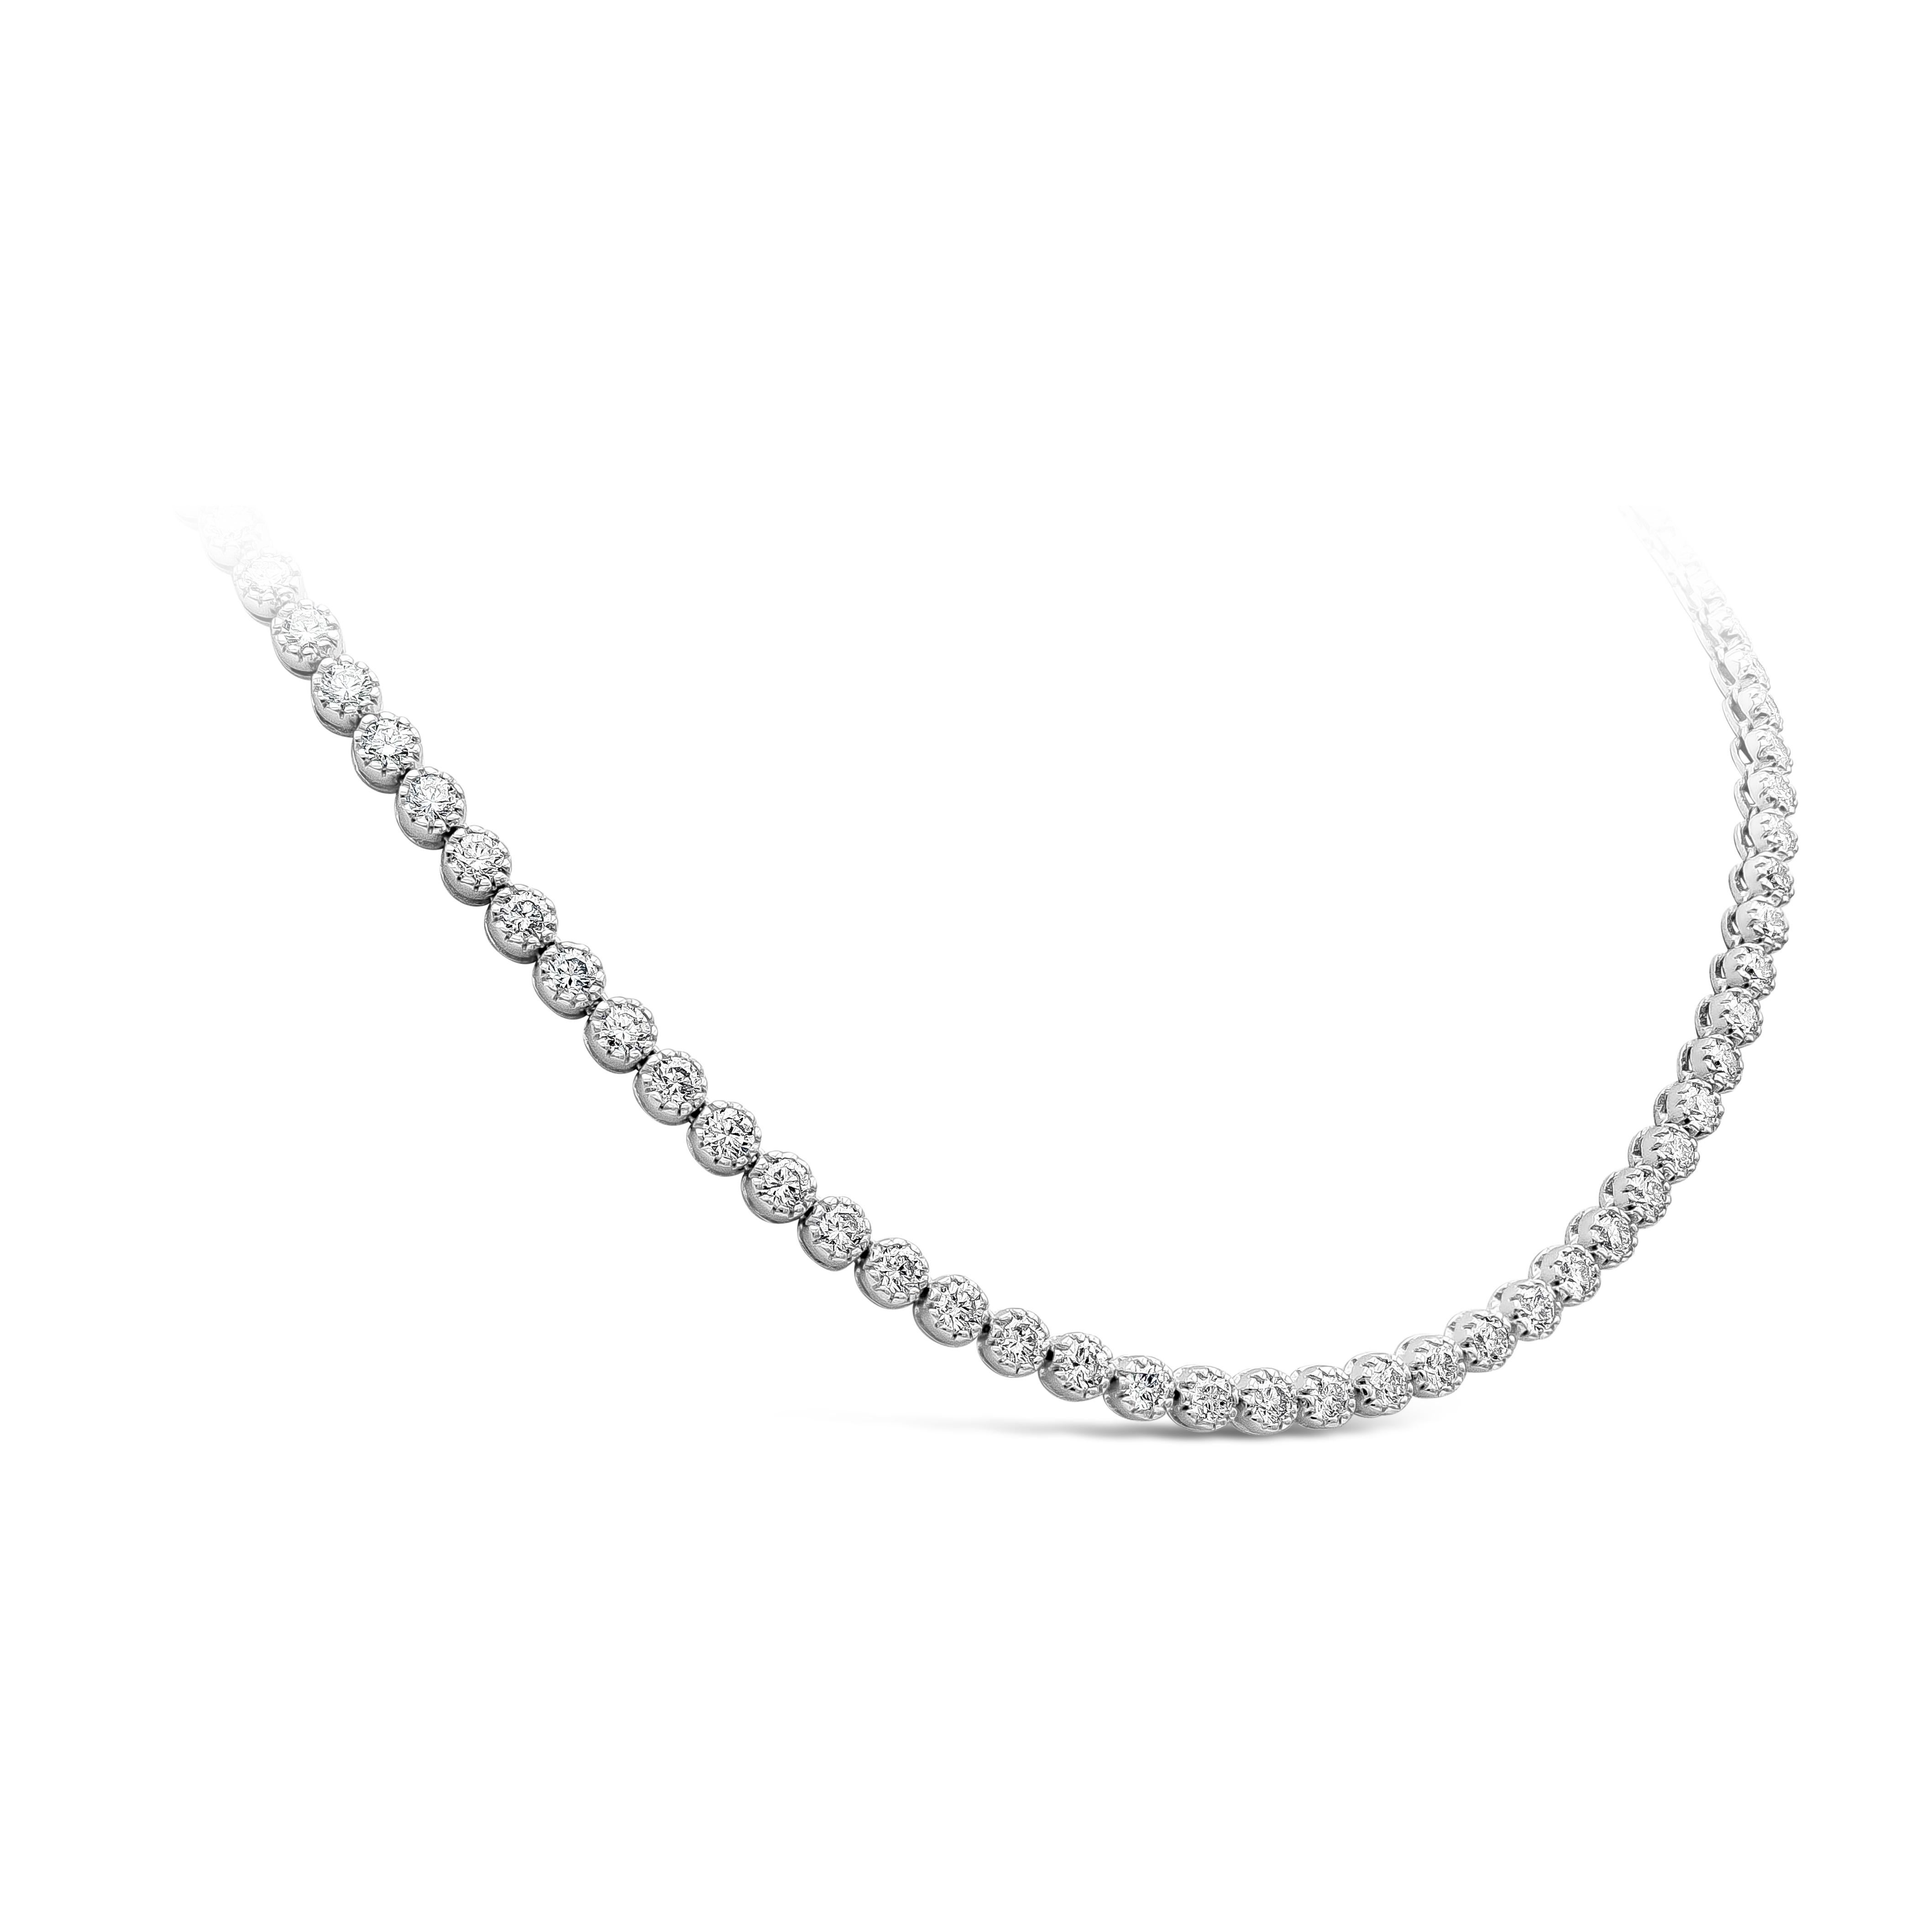 A stylish and classy tennis necklace style showcasing a row of round brilliant diamonds weighing 13.27 carats total, set in a ten-prong style mounting made in 18K white gold. Diamonds are approximately D - F color, SI clarity. 16.38 inches in